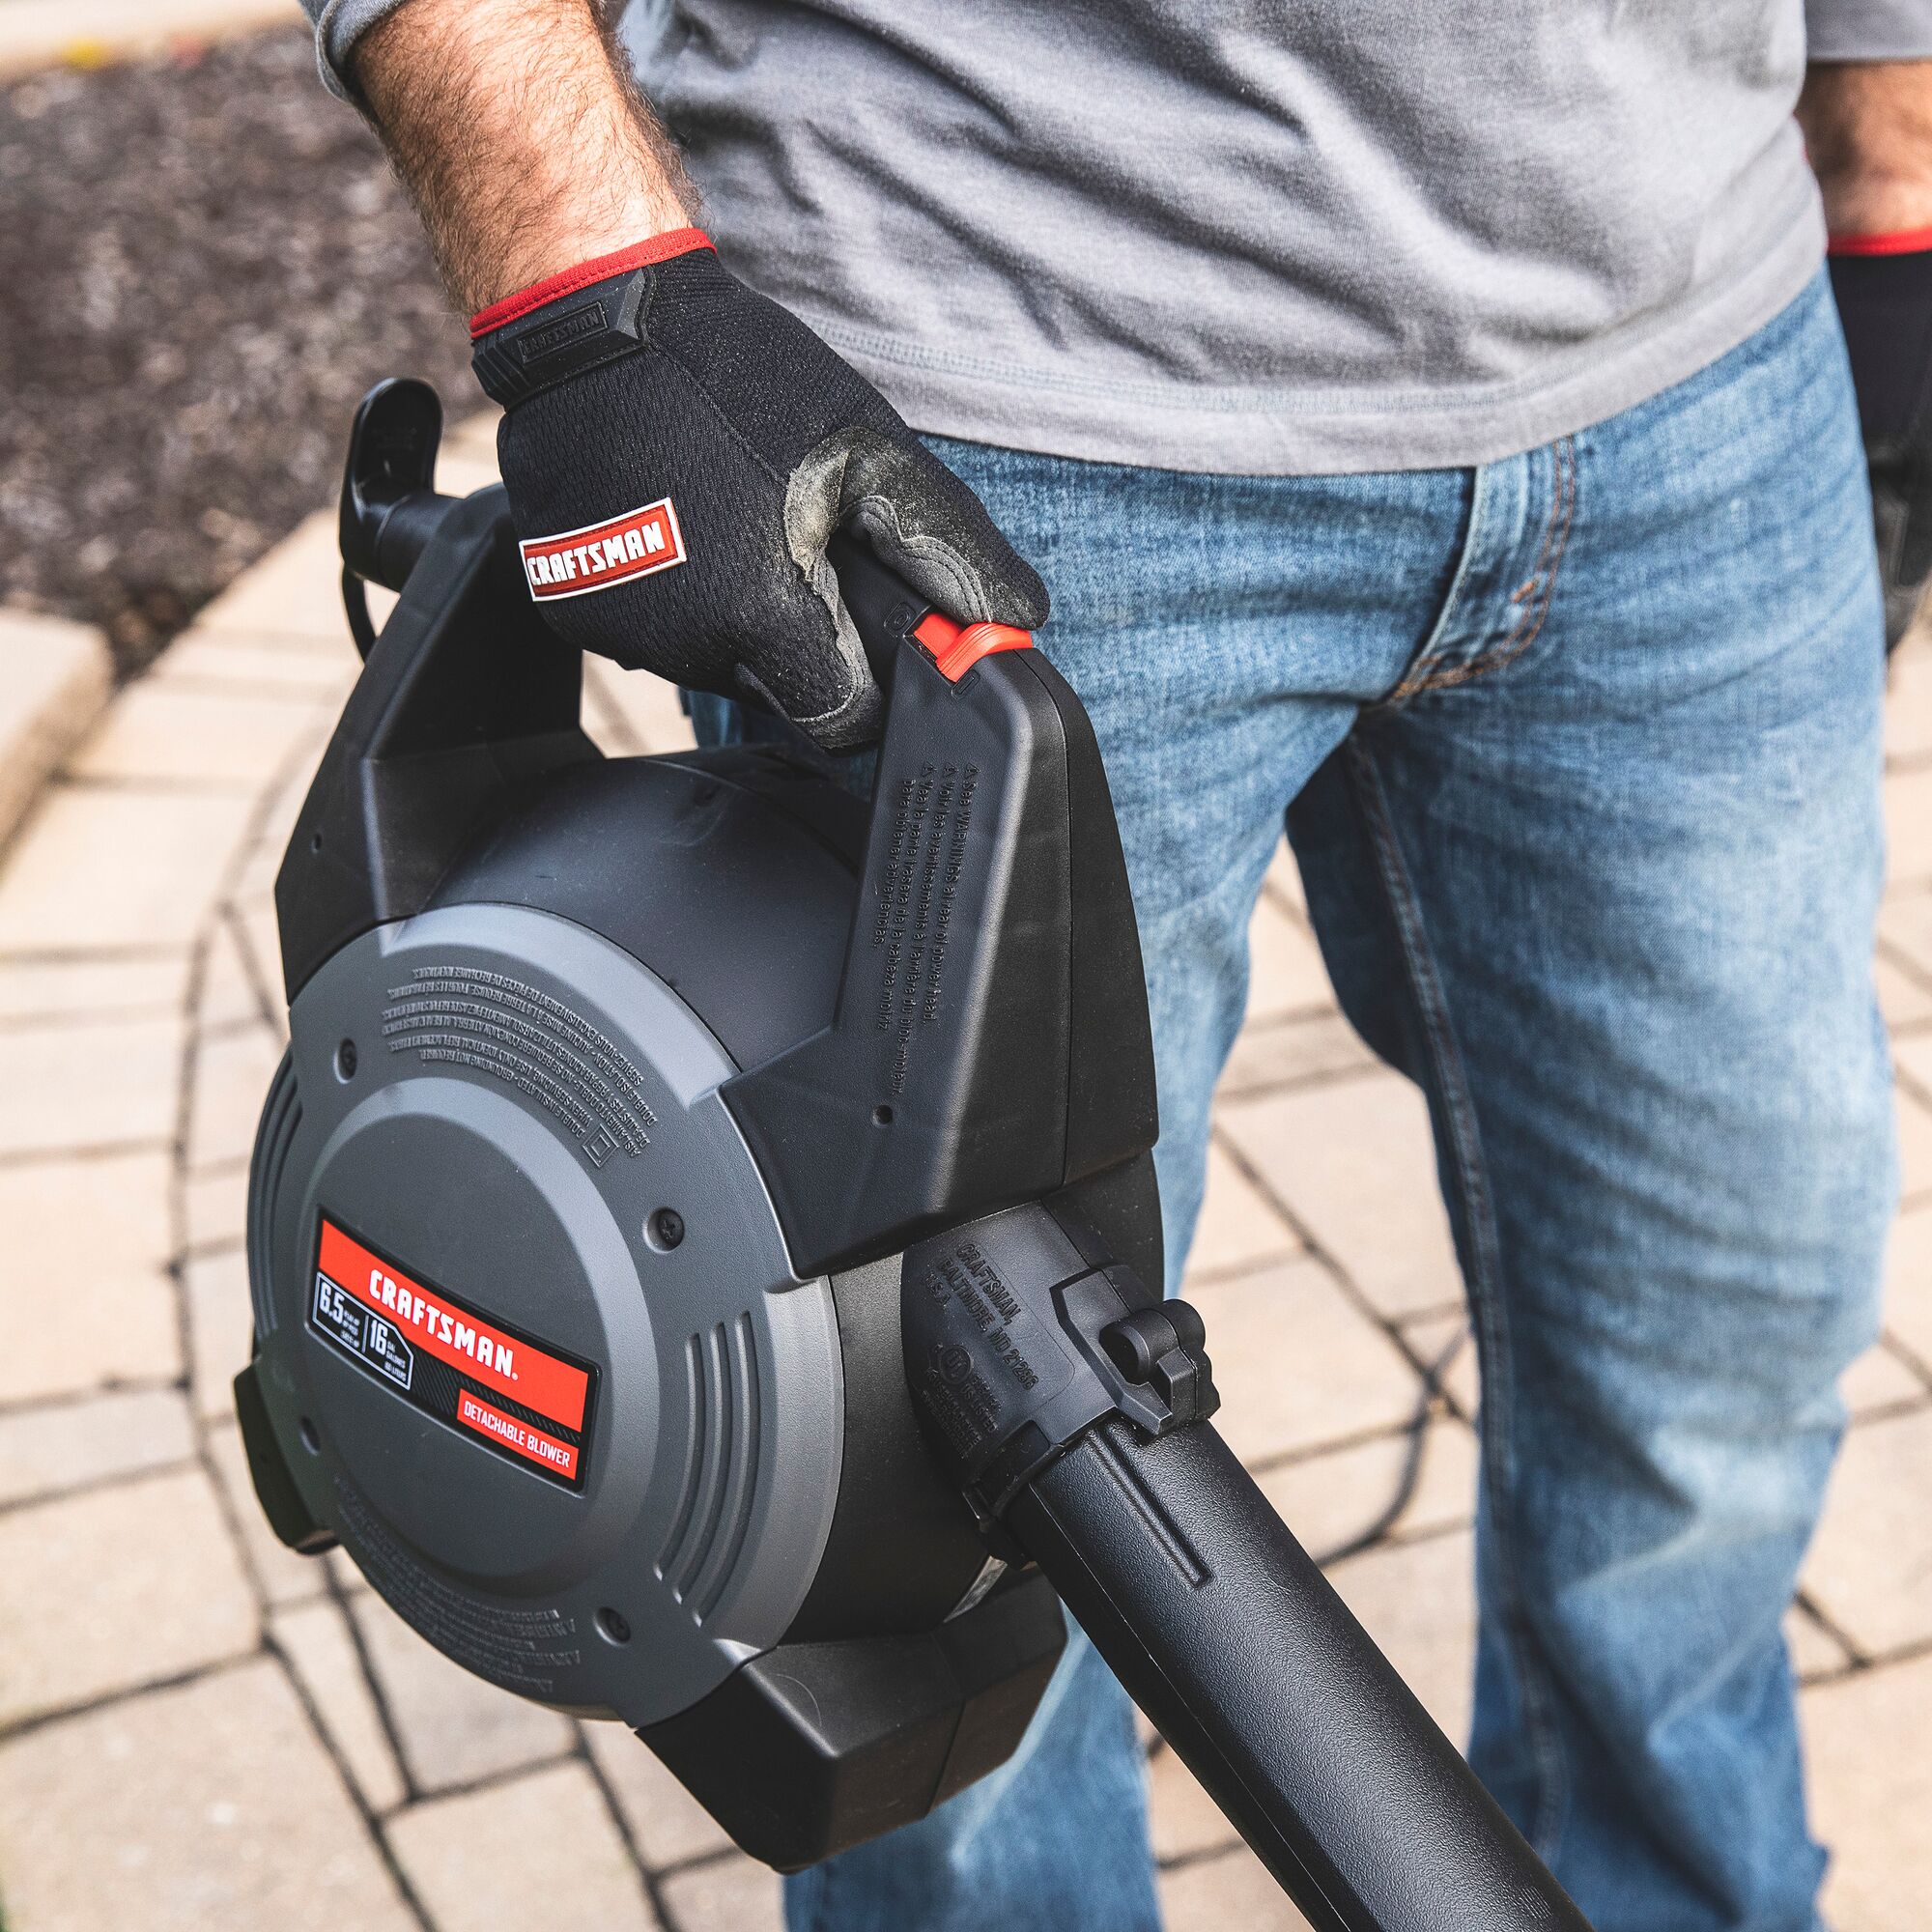 Man holding the removable powerhead from a CRAFTSMAN Wet/Dry Vac on outdoor patio as a leaf blower